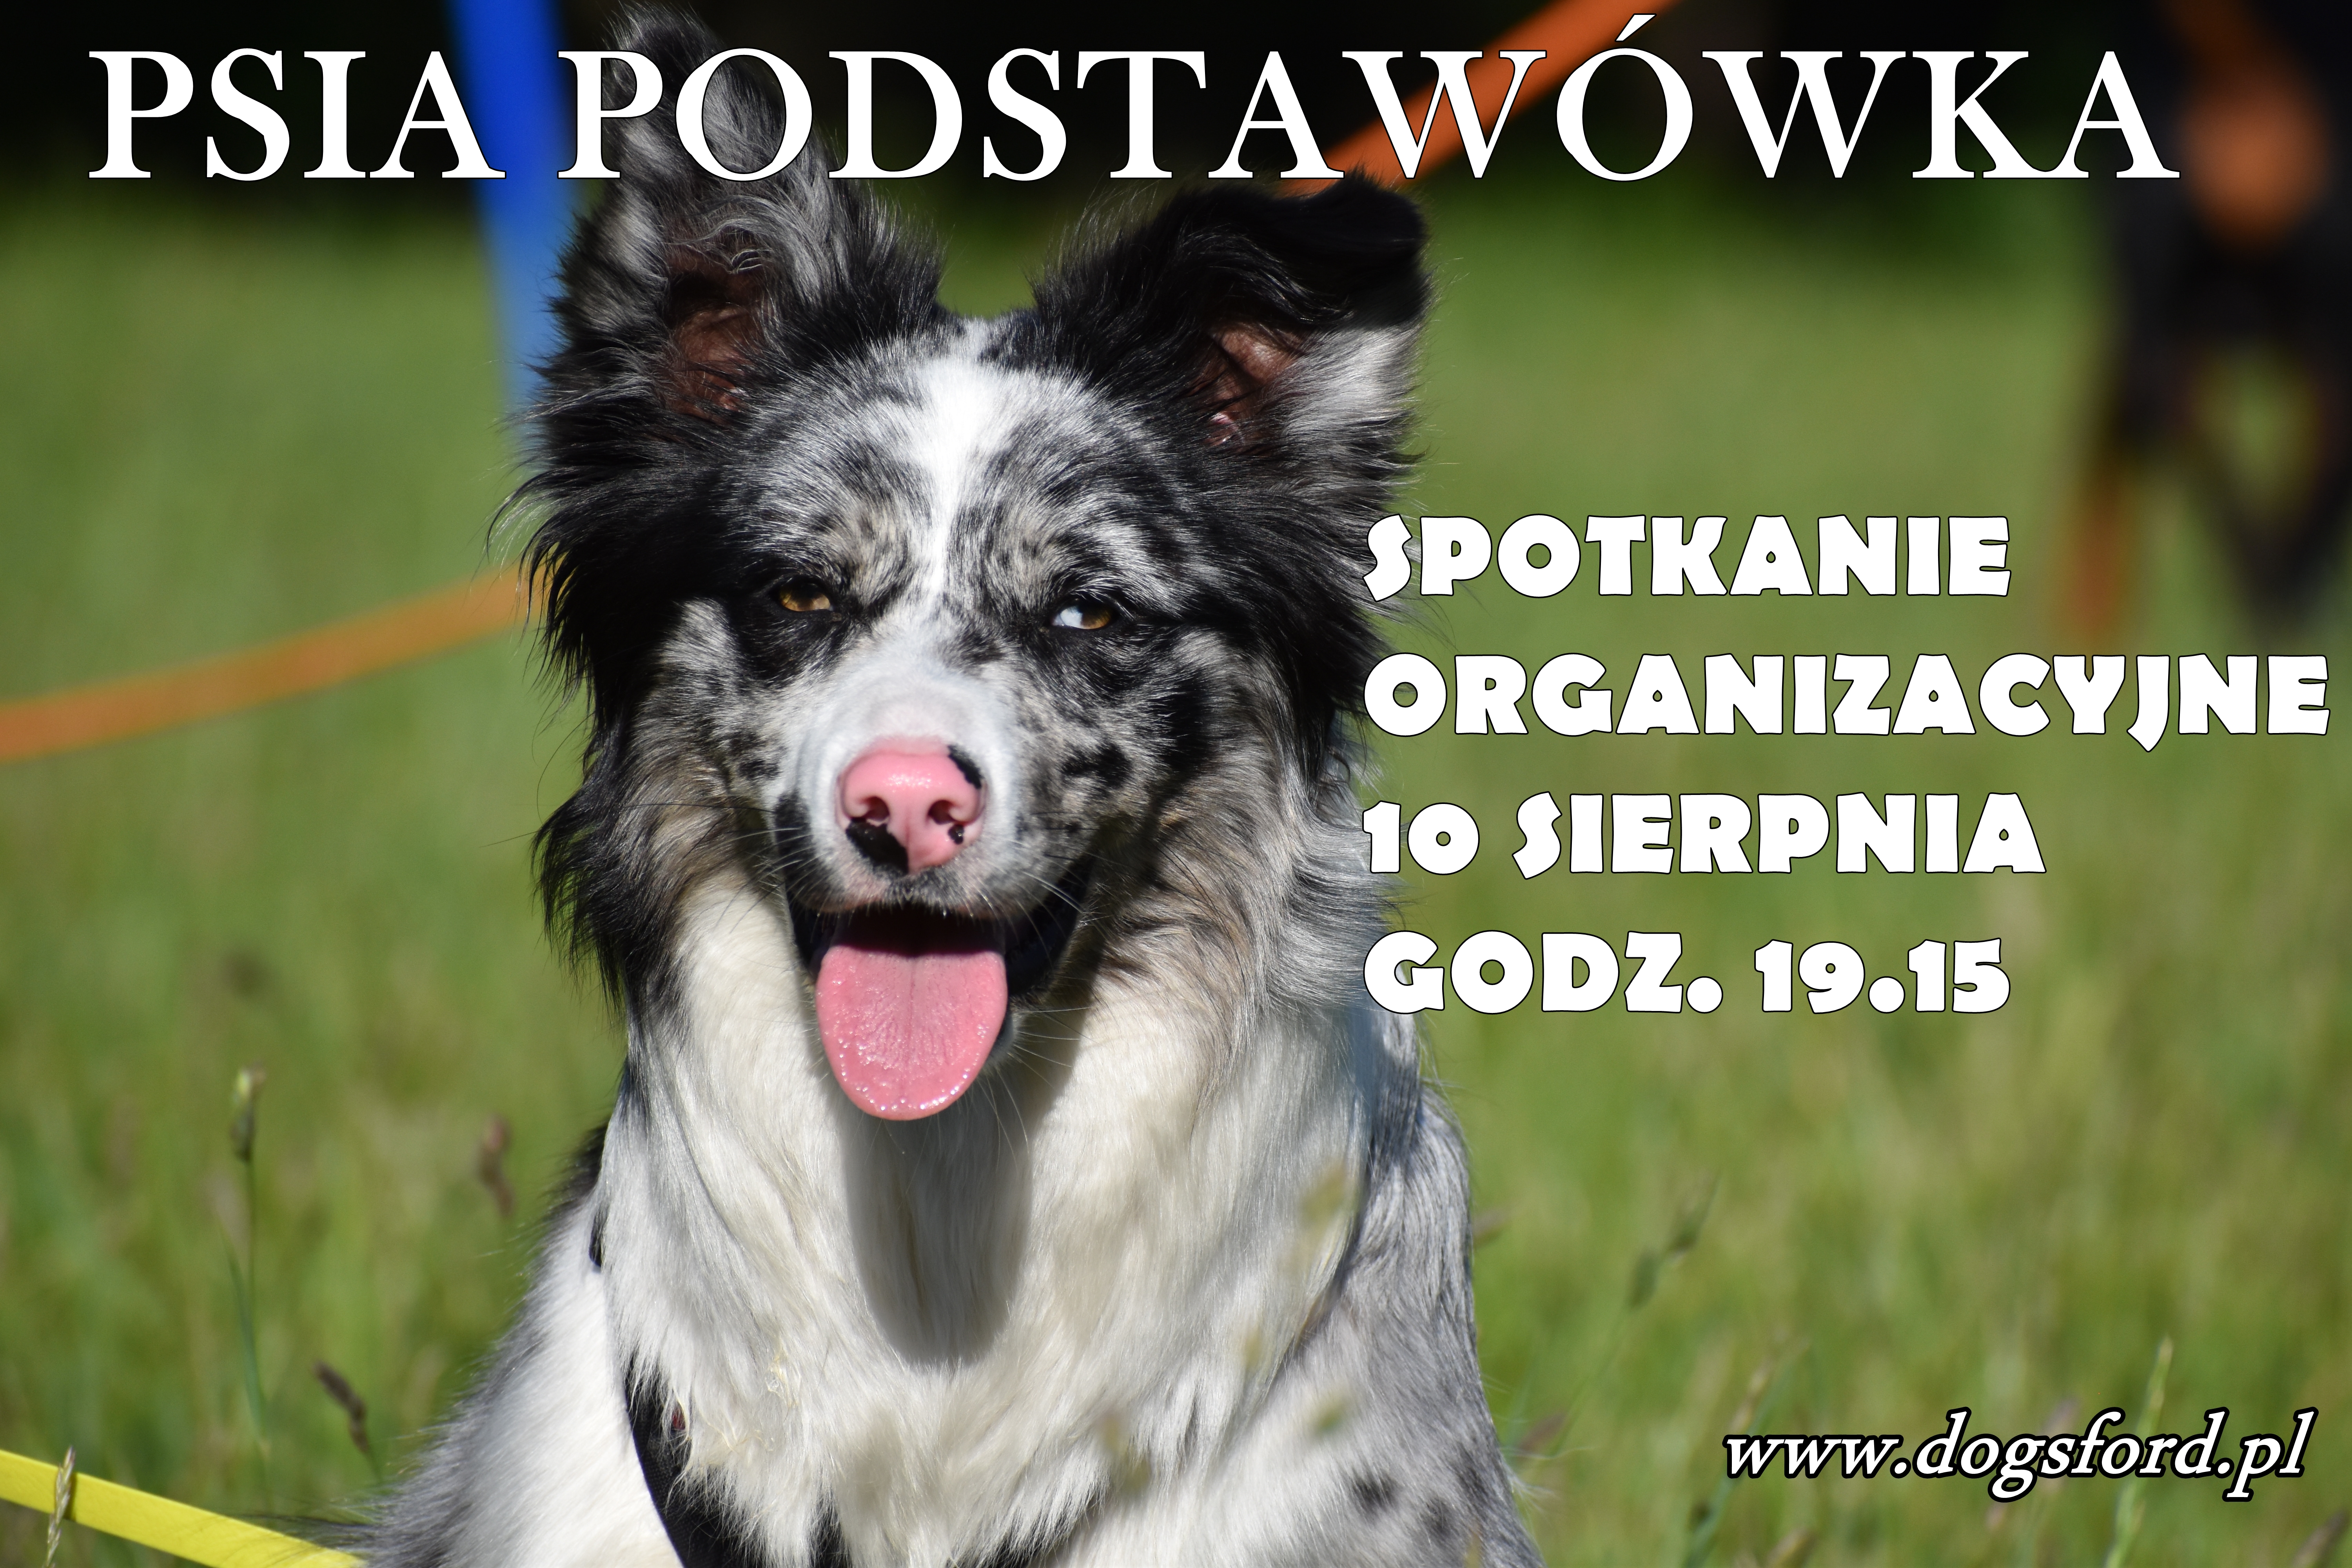 You are currently viewing Psia podstawówka